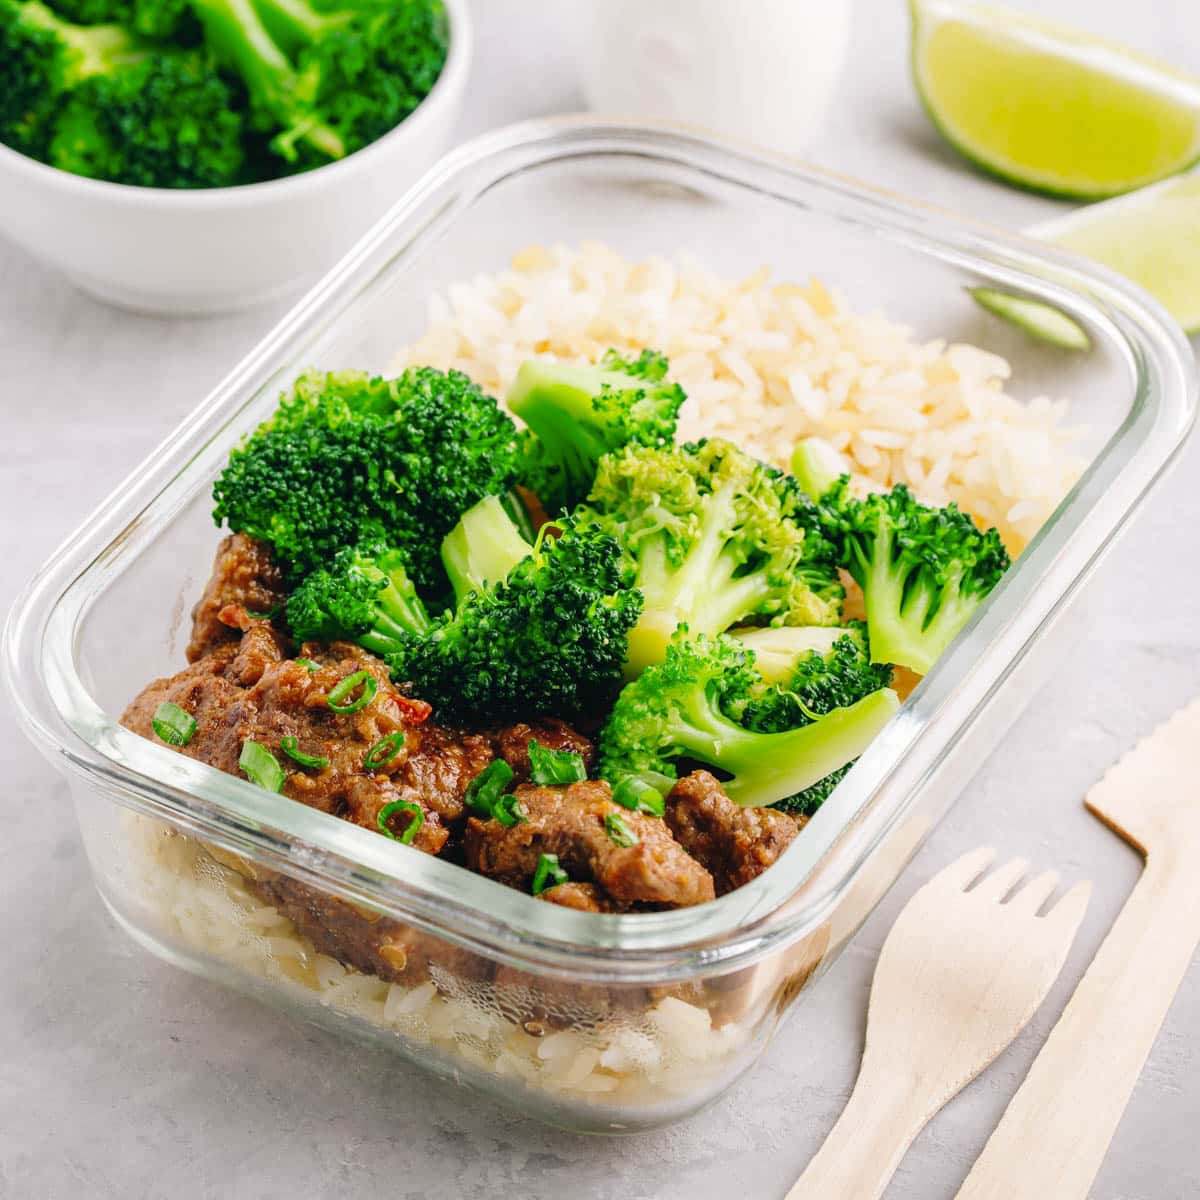 Leftover beef, broccoli and rice in a glass container.